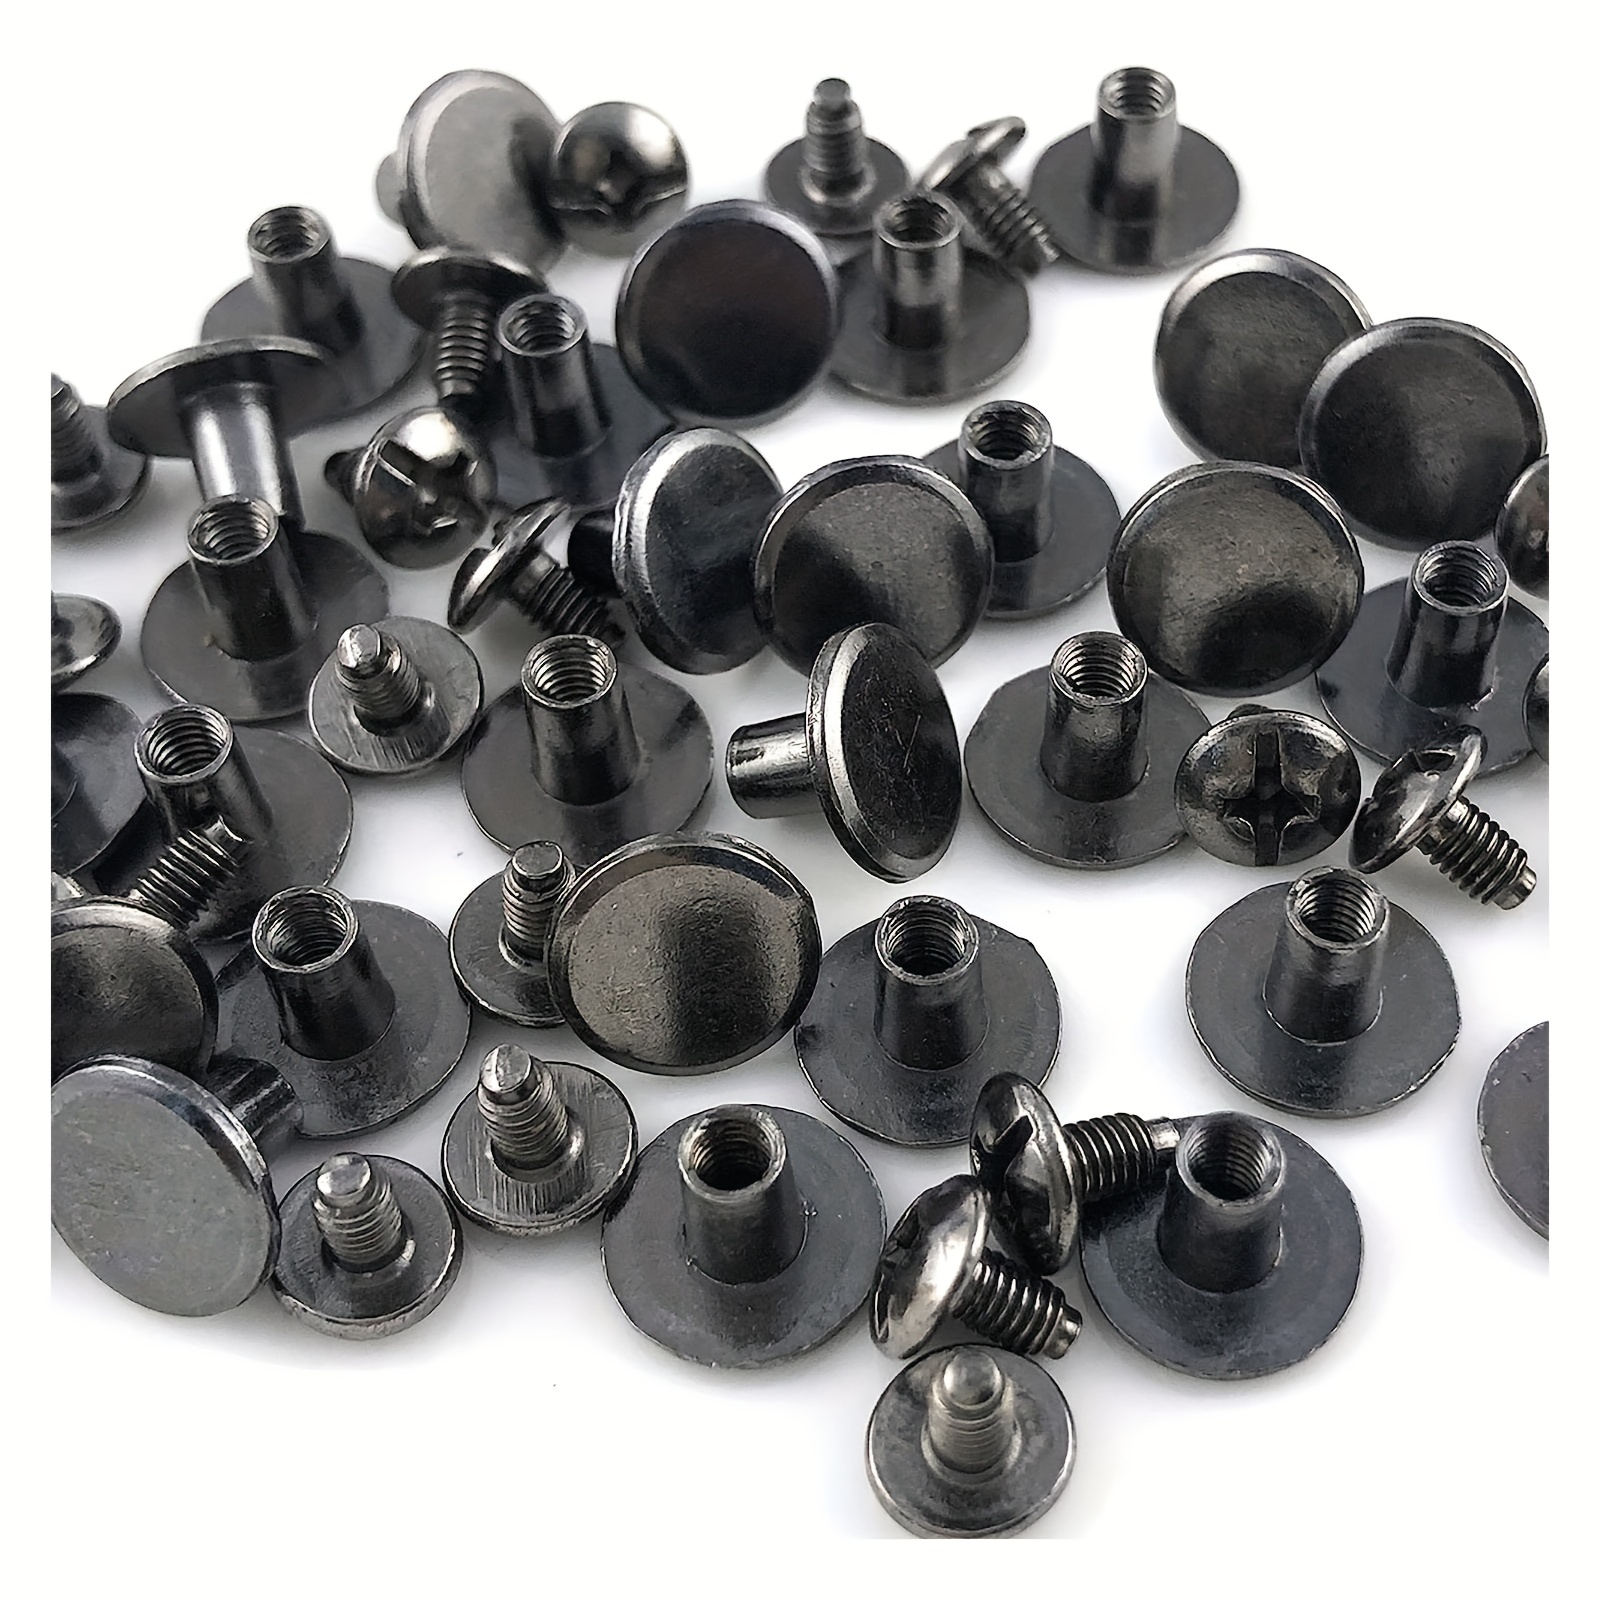 90 Sets Chicago Screws Assorted Kit 6 Sizes of Round Flat Head Leather  Rivets Metal Screw Studs for DIY Leather Craft and Bookbinding (M5 X 4 5 6  8 10 12) (Black)